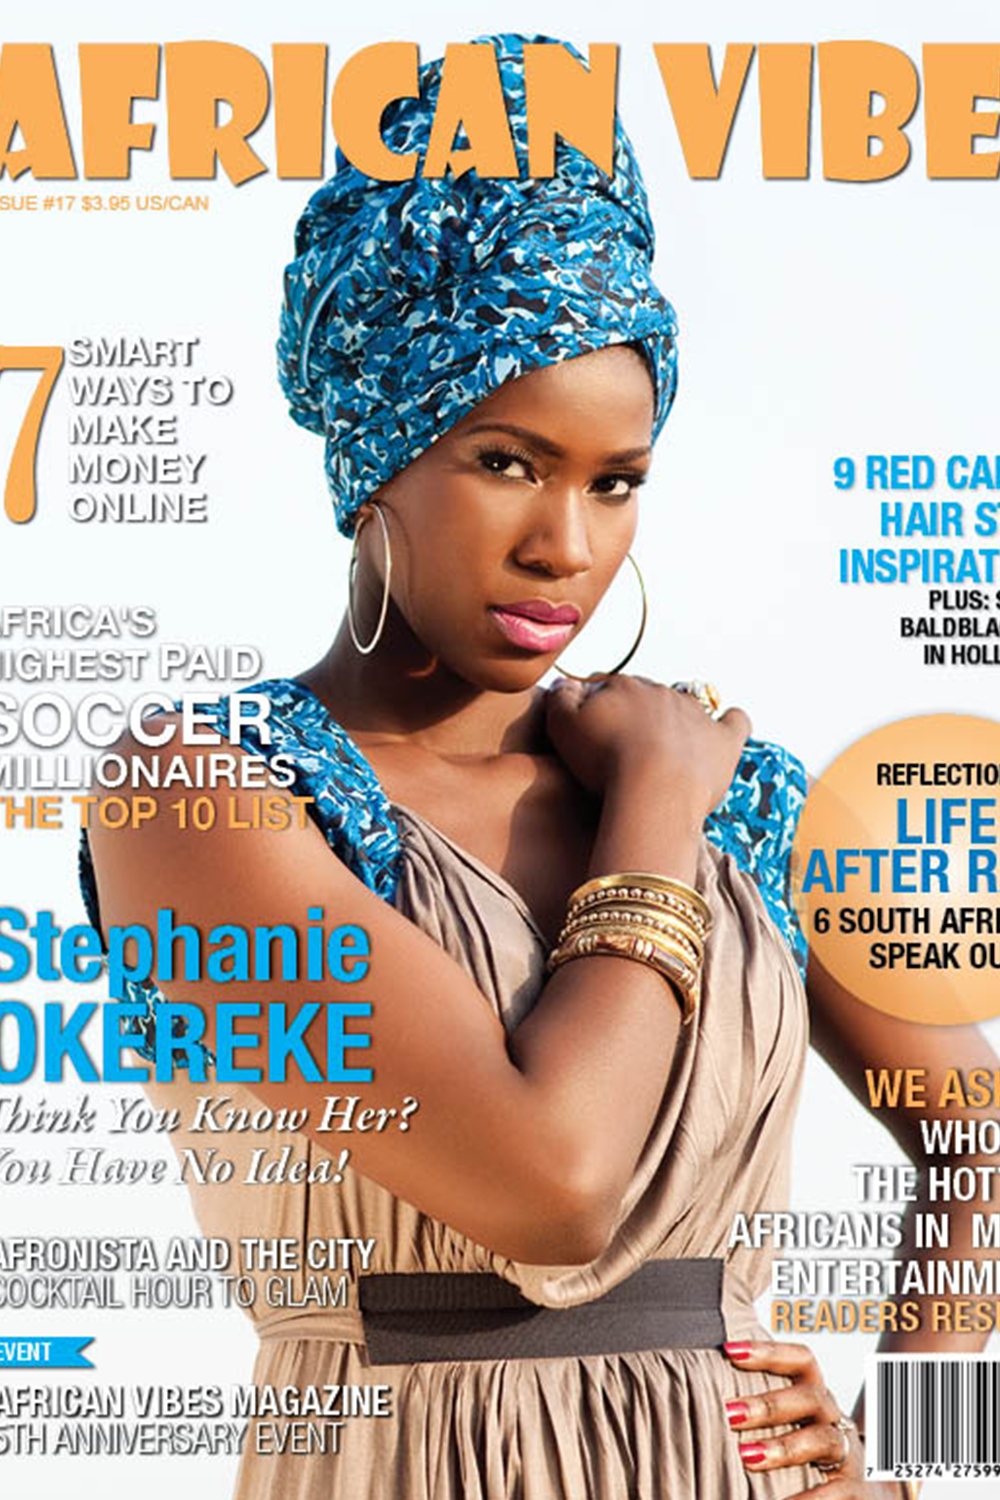 The cover of african vibe magazine featuring a woman in a turban.